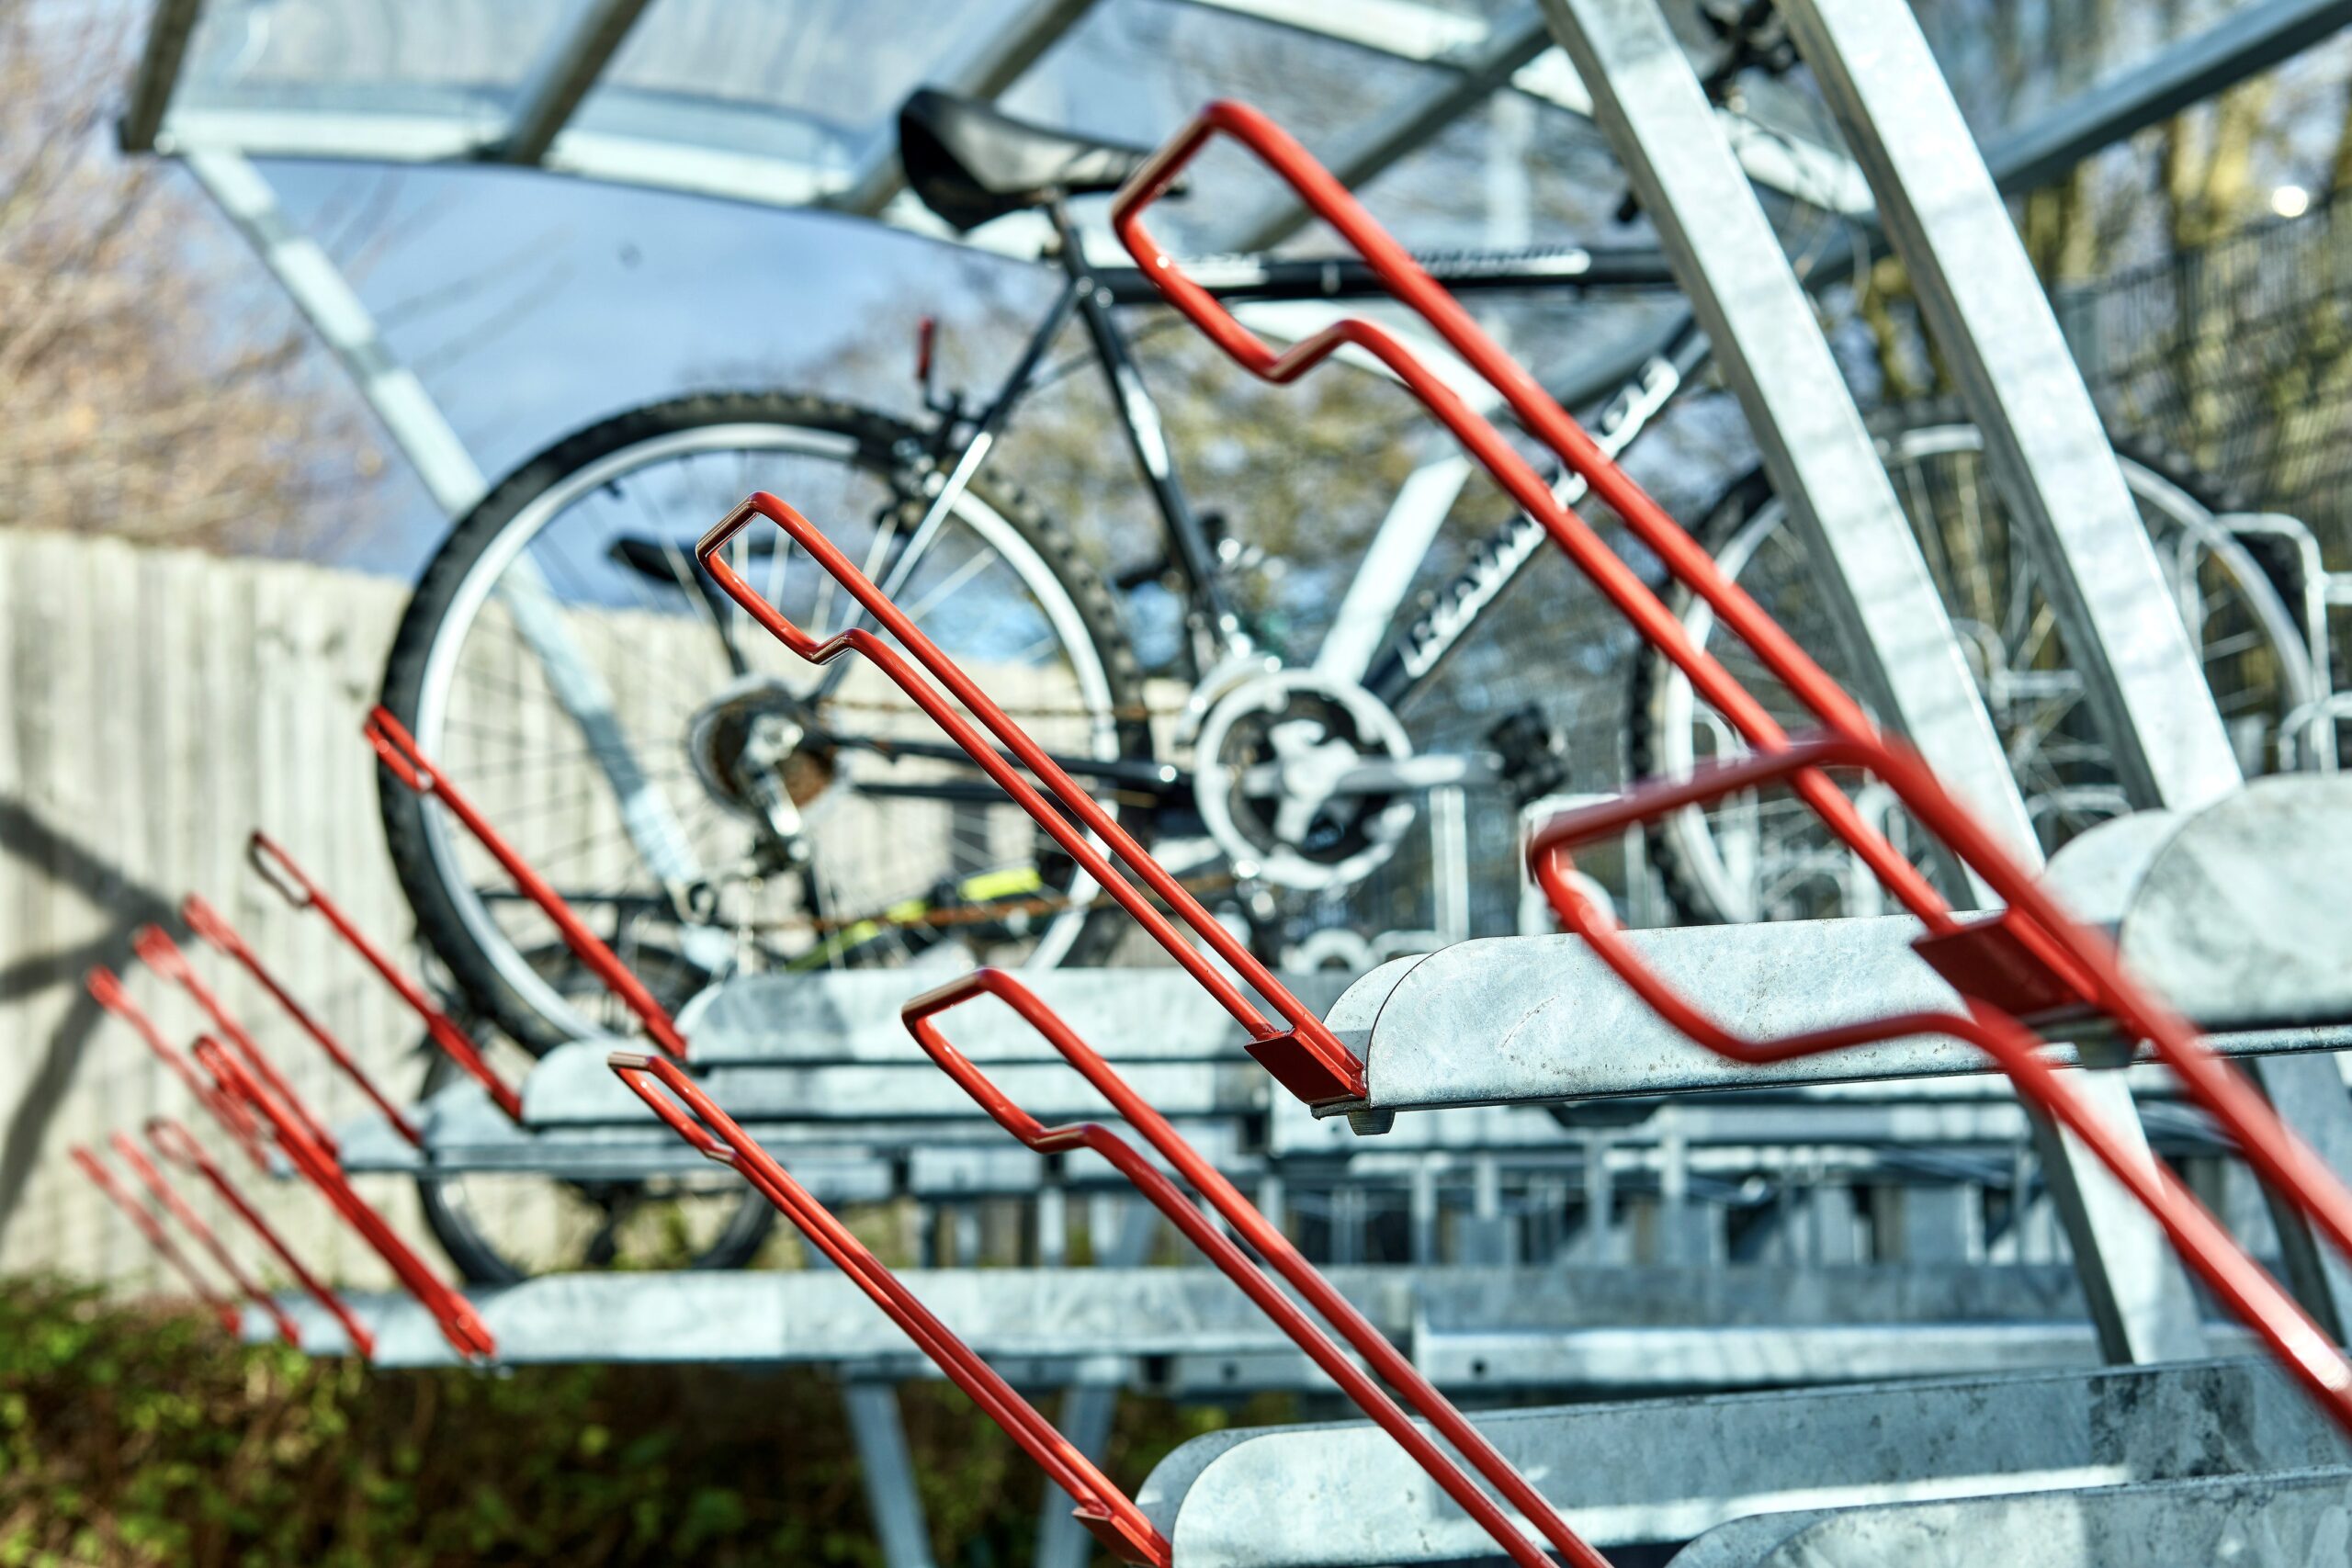 two tier bike rack with red galvanised handles in outdoor Chelsea shelter